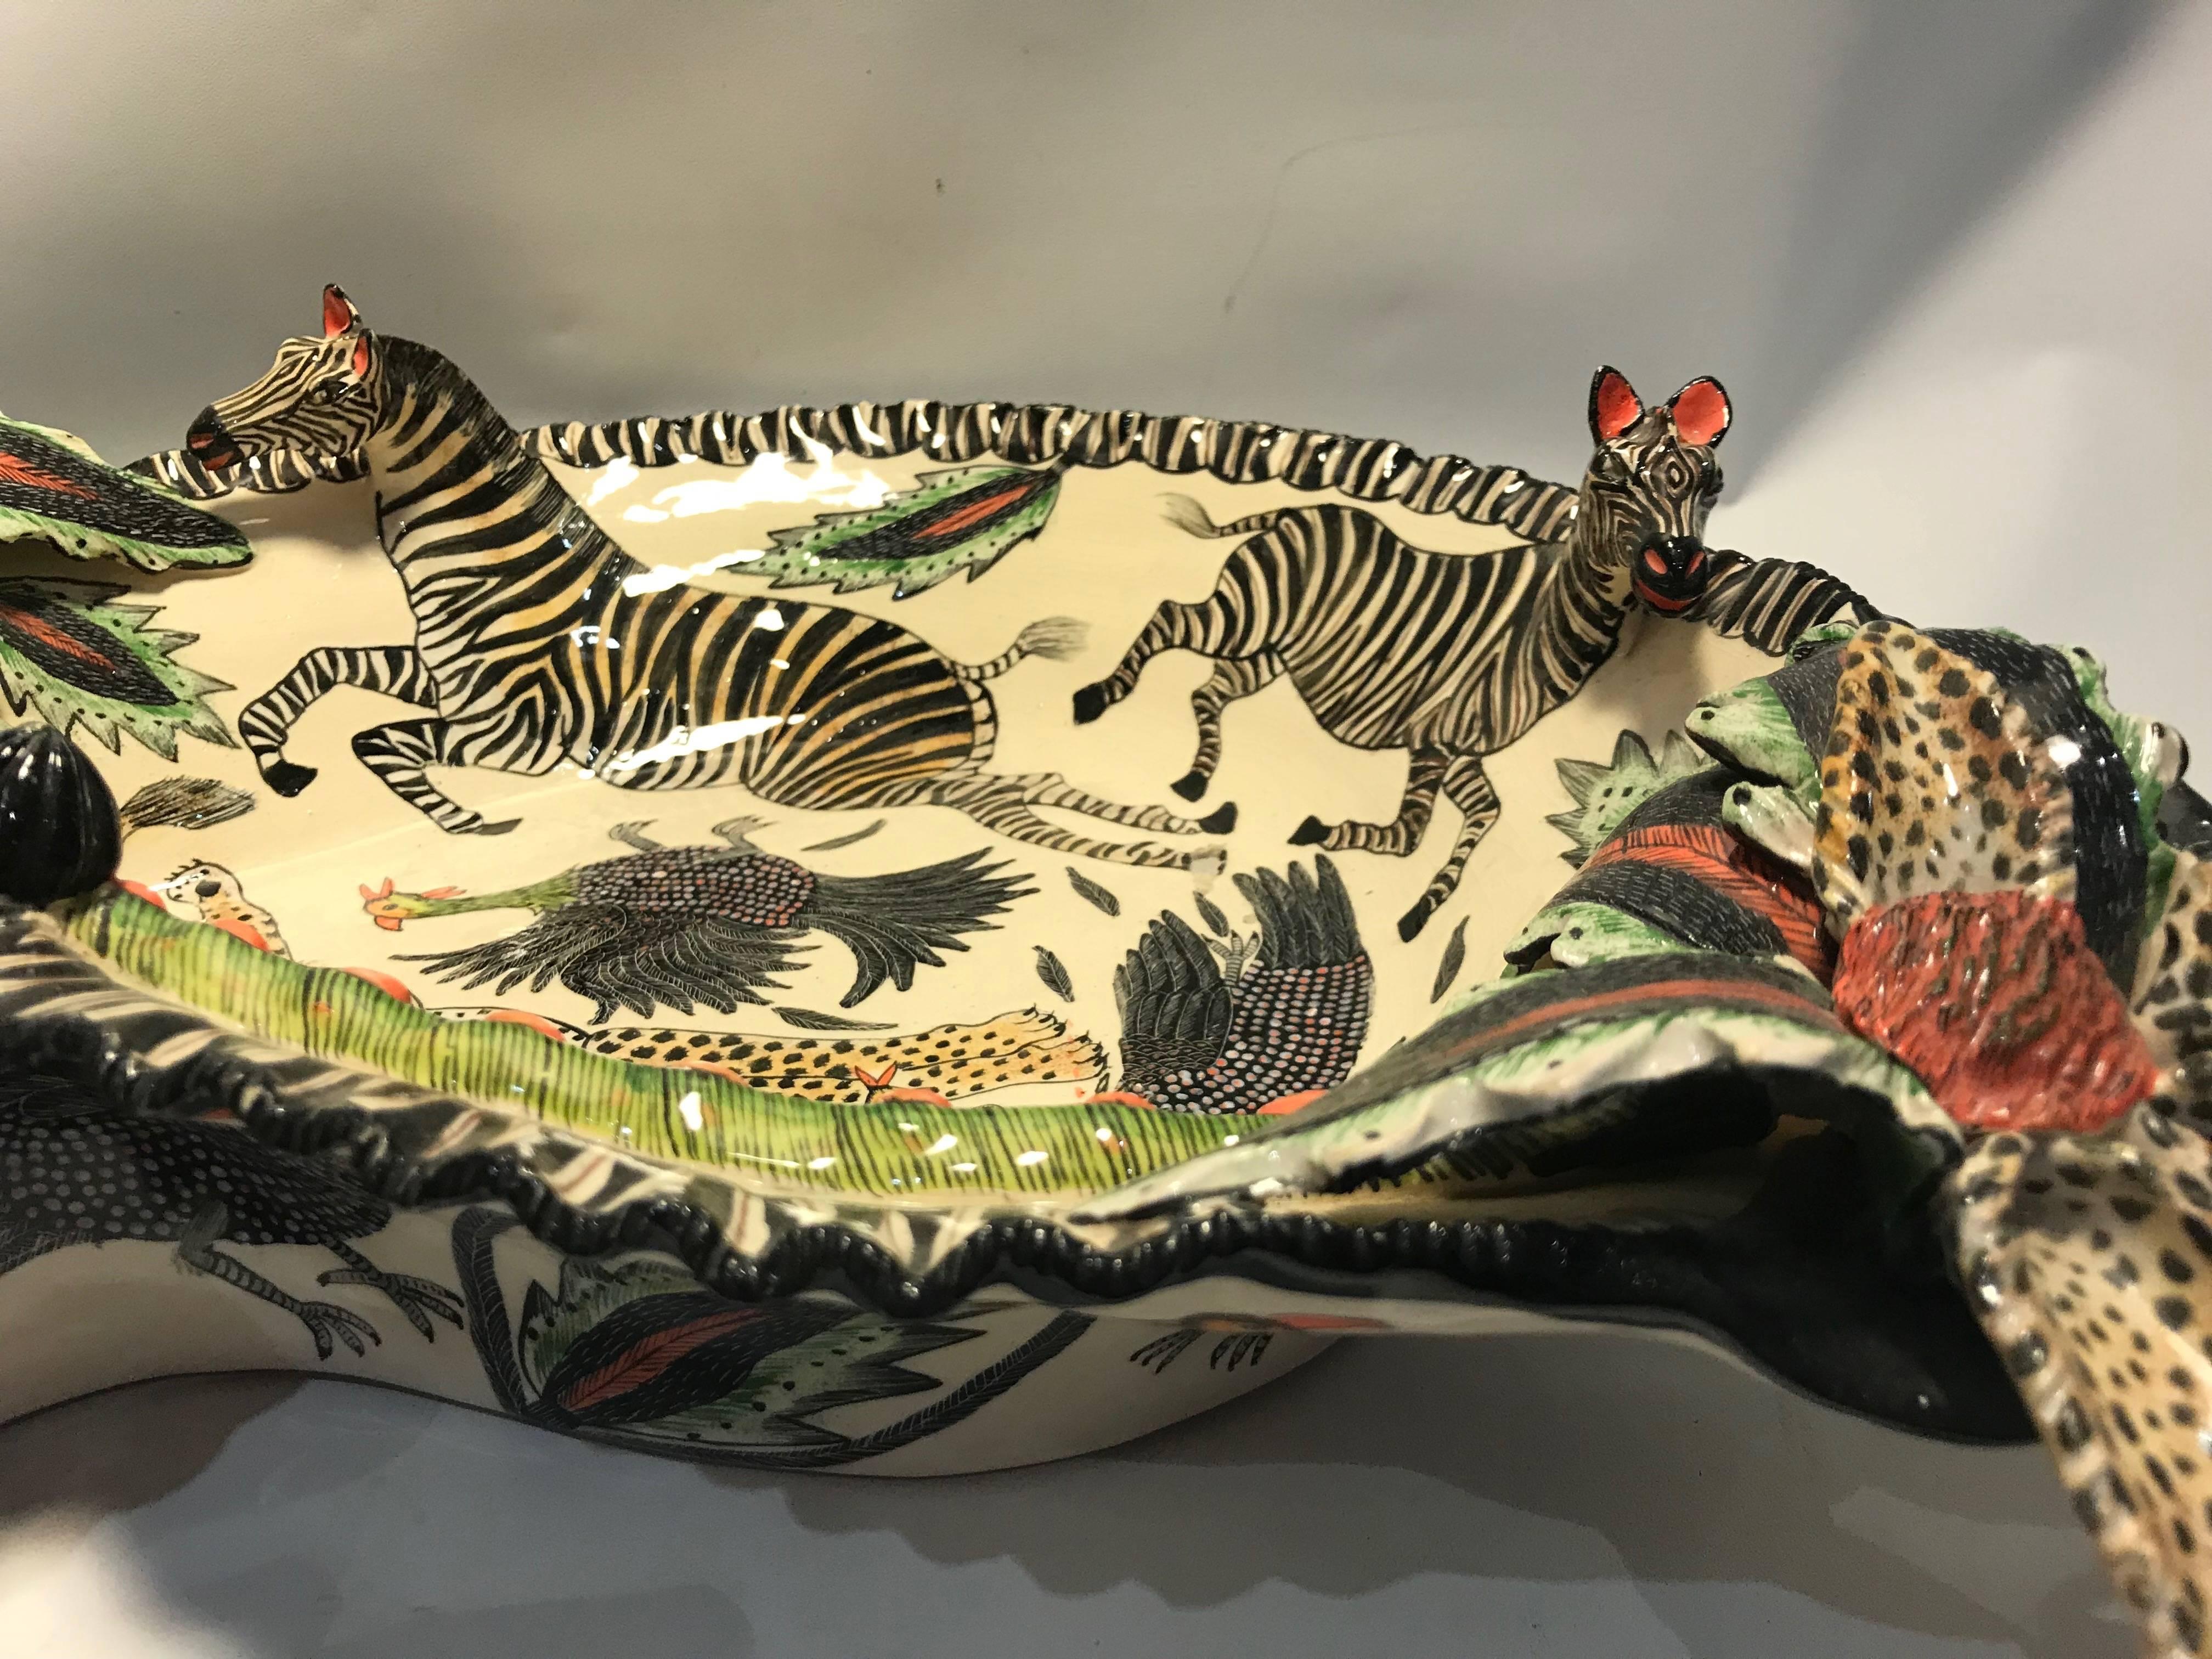 South African Zebra and Leopard Decorative Dish or Bowl by Ardmore Ceramics, South Africa